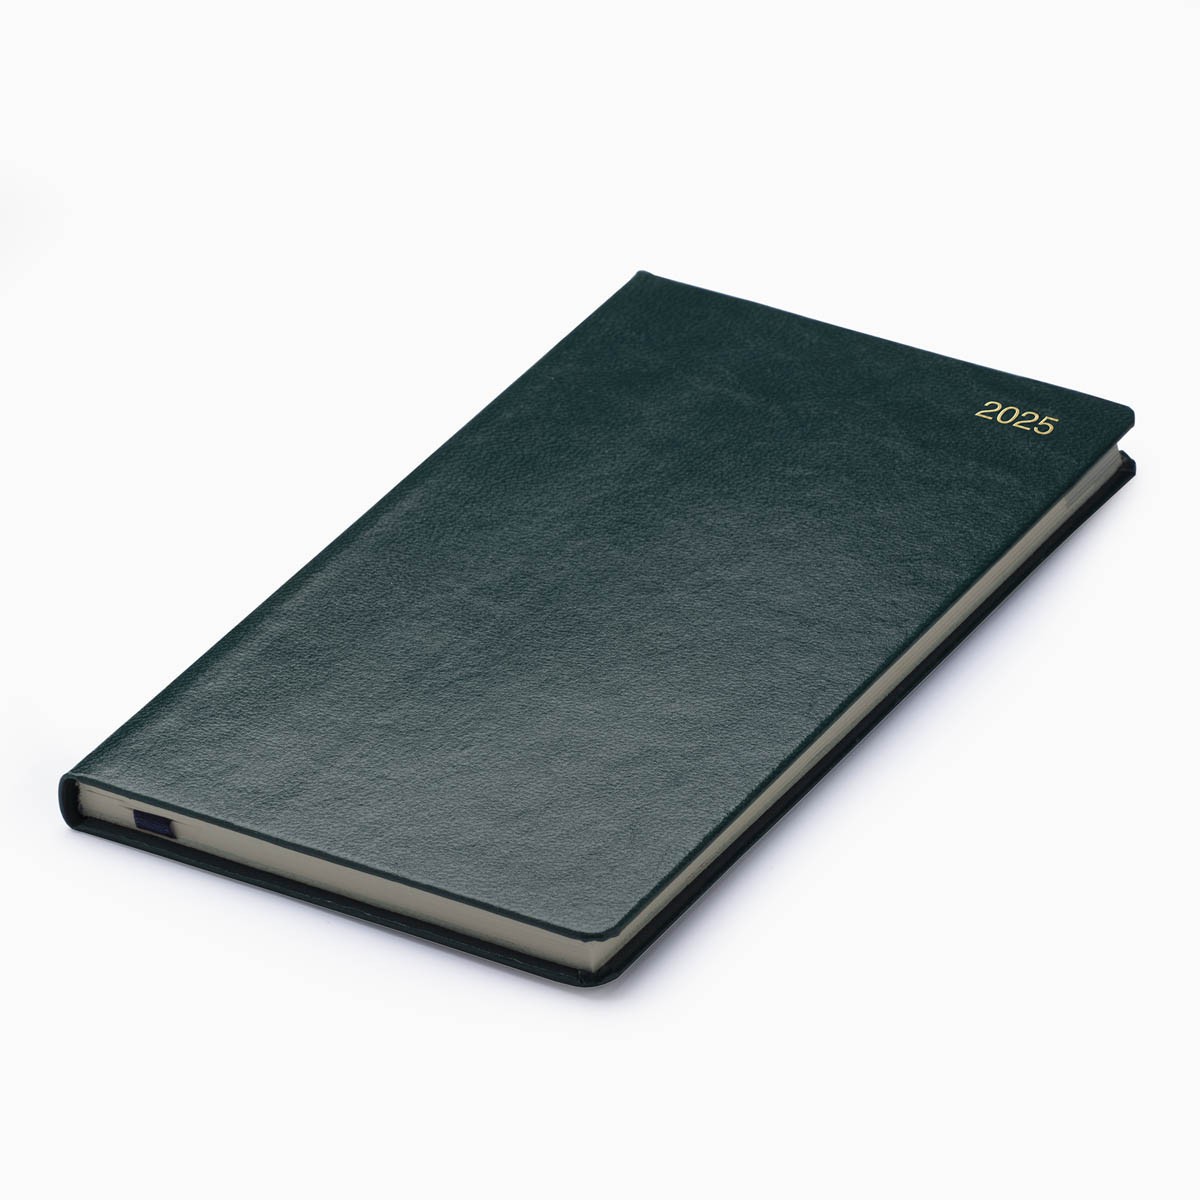 Strata Pocket Diary - Cream Pages